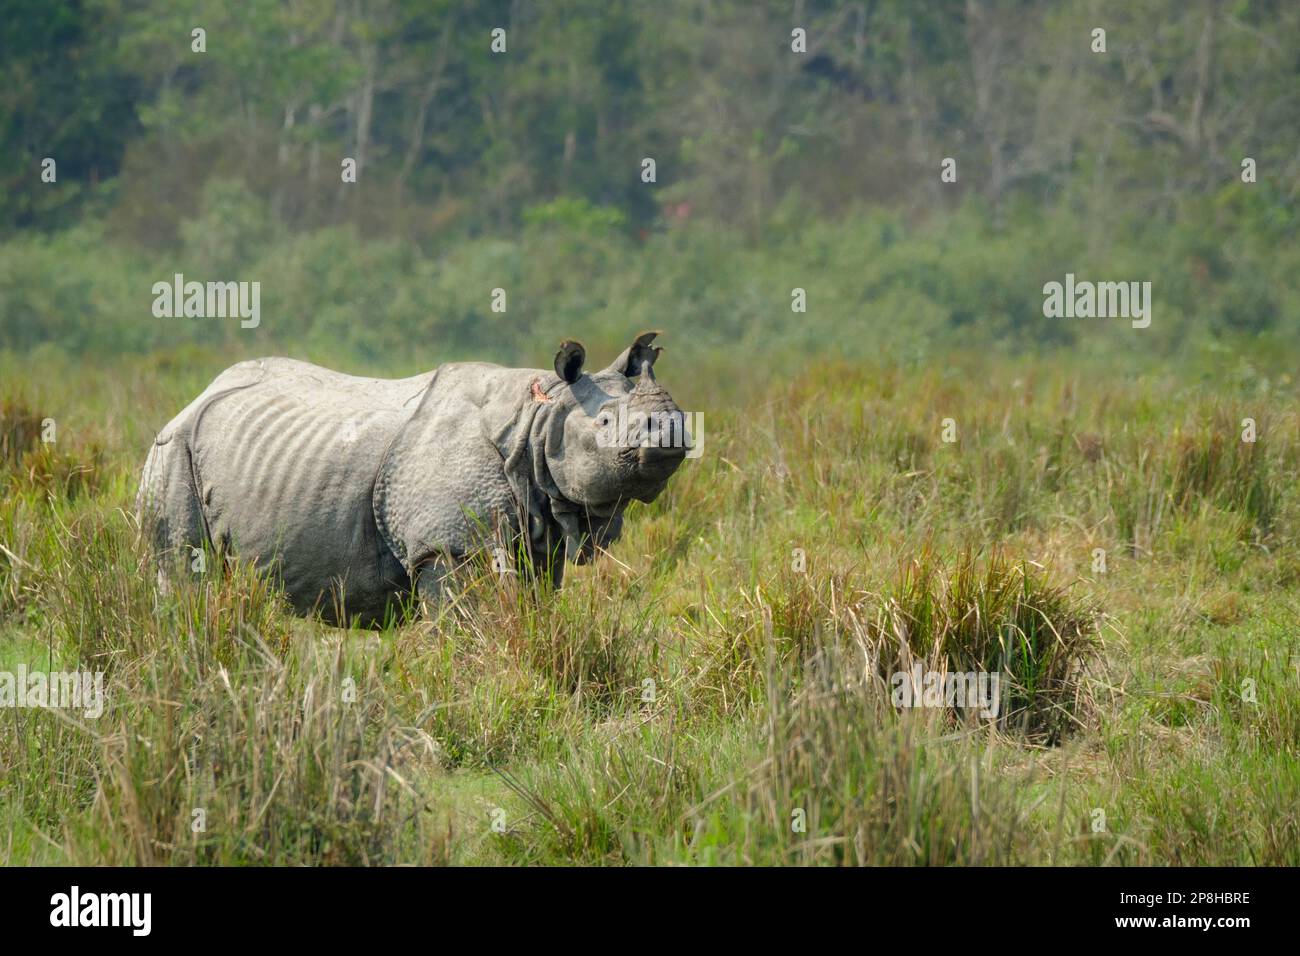 Great Indian Rhino, Rhinoceros unicornis, stands proudly in grassland cautious observing for tigers. Kaziranga National Park, Assam, India Stock Photo